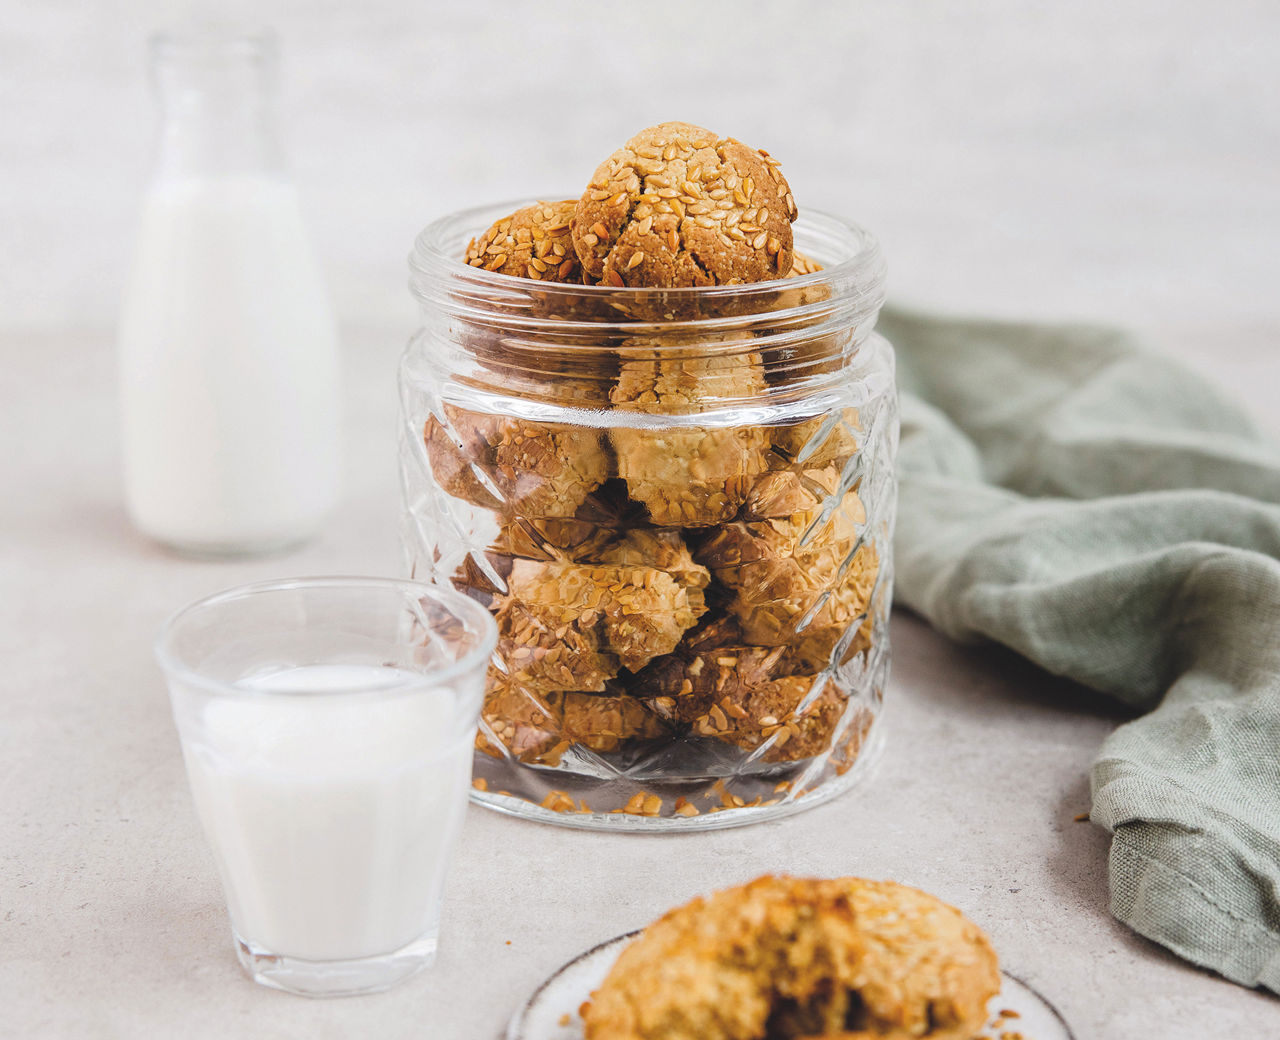 A jar of almond cookies with sesame on top and a glass of milk